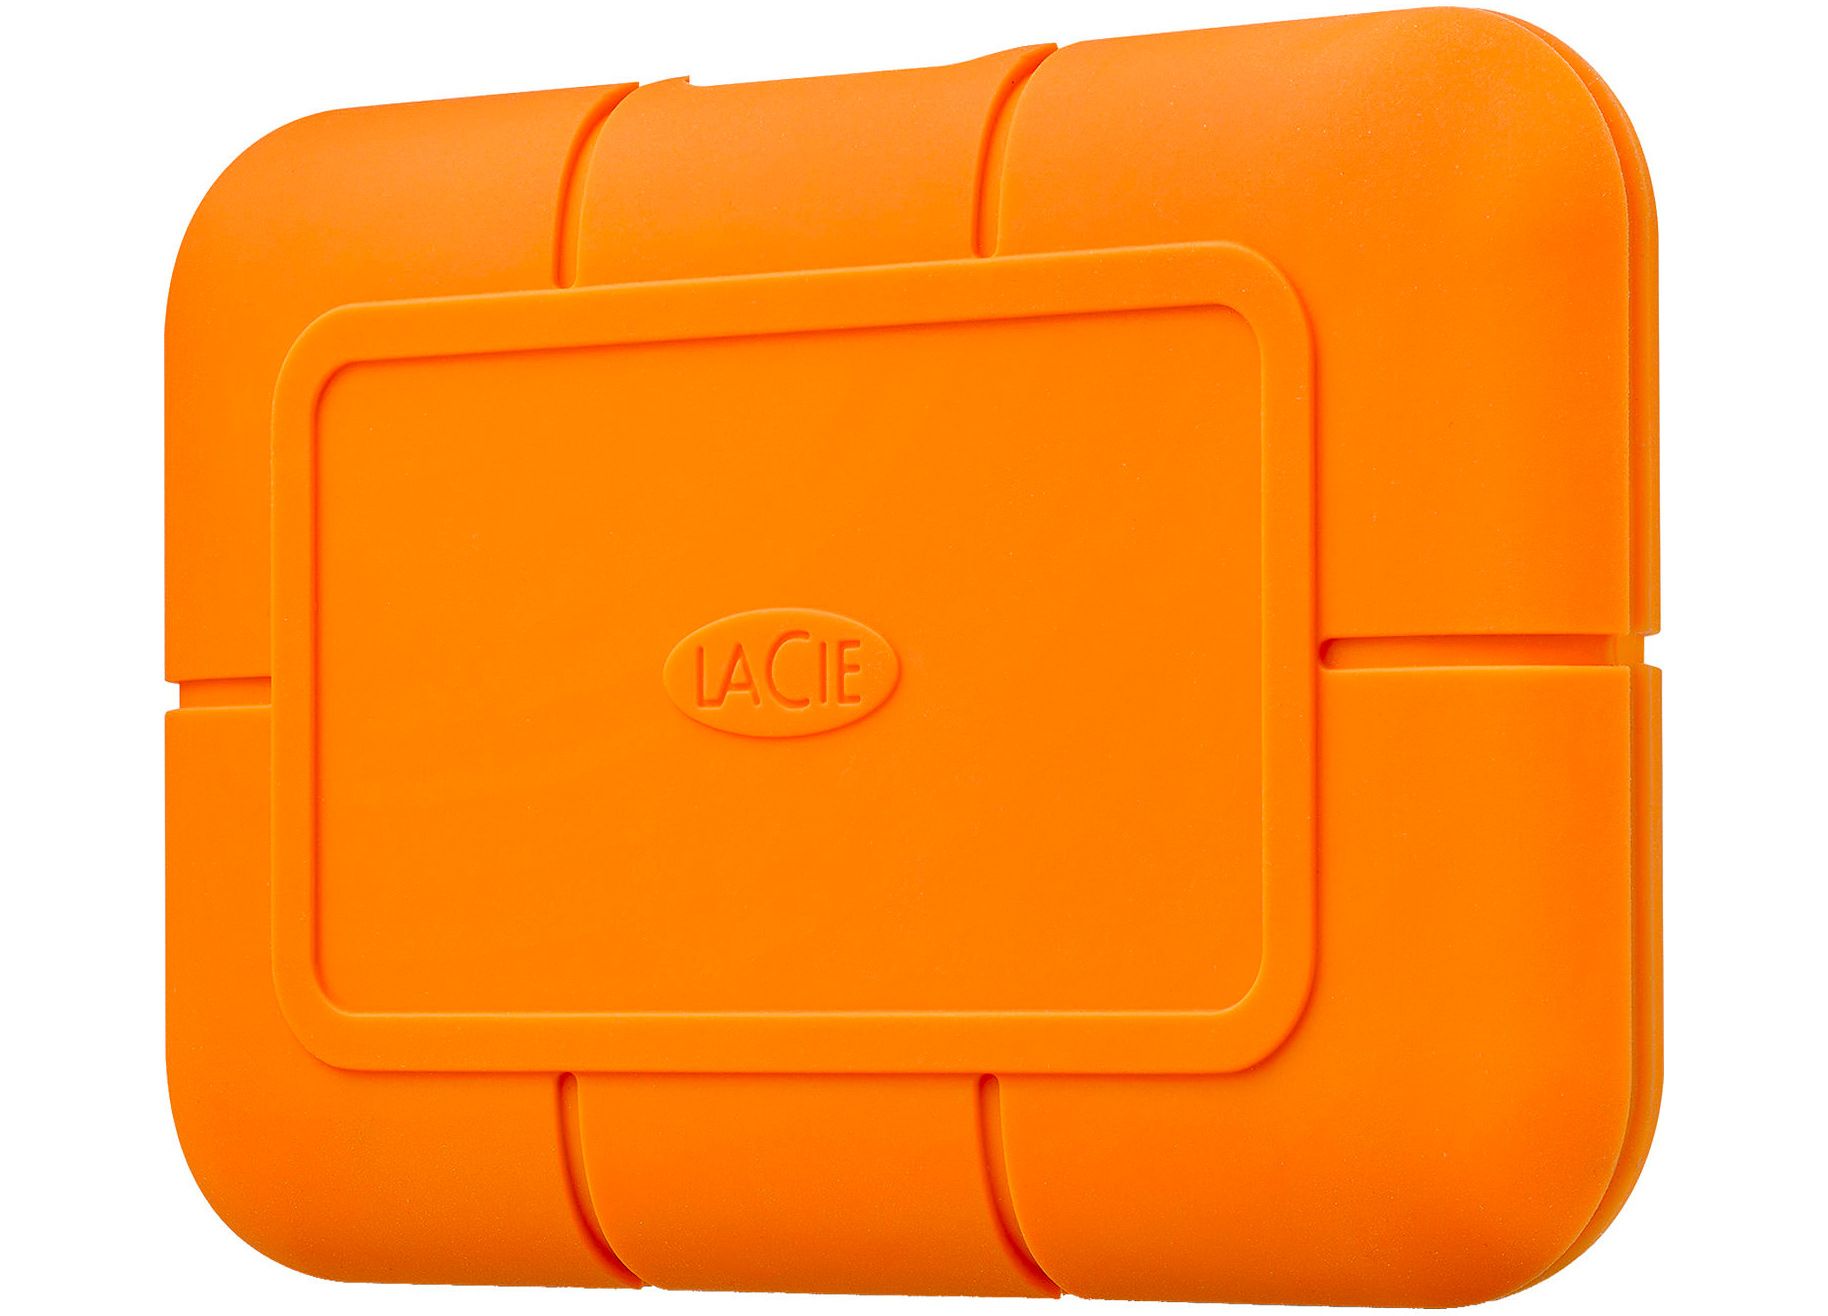 LaCie - Disque dur externe Rugged SSD 1TB USB 3.1 Type-C